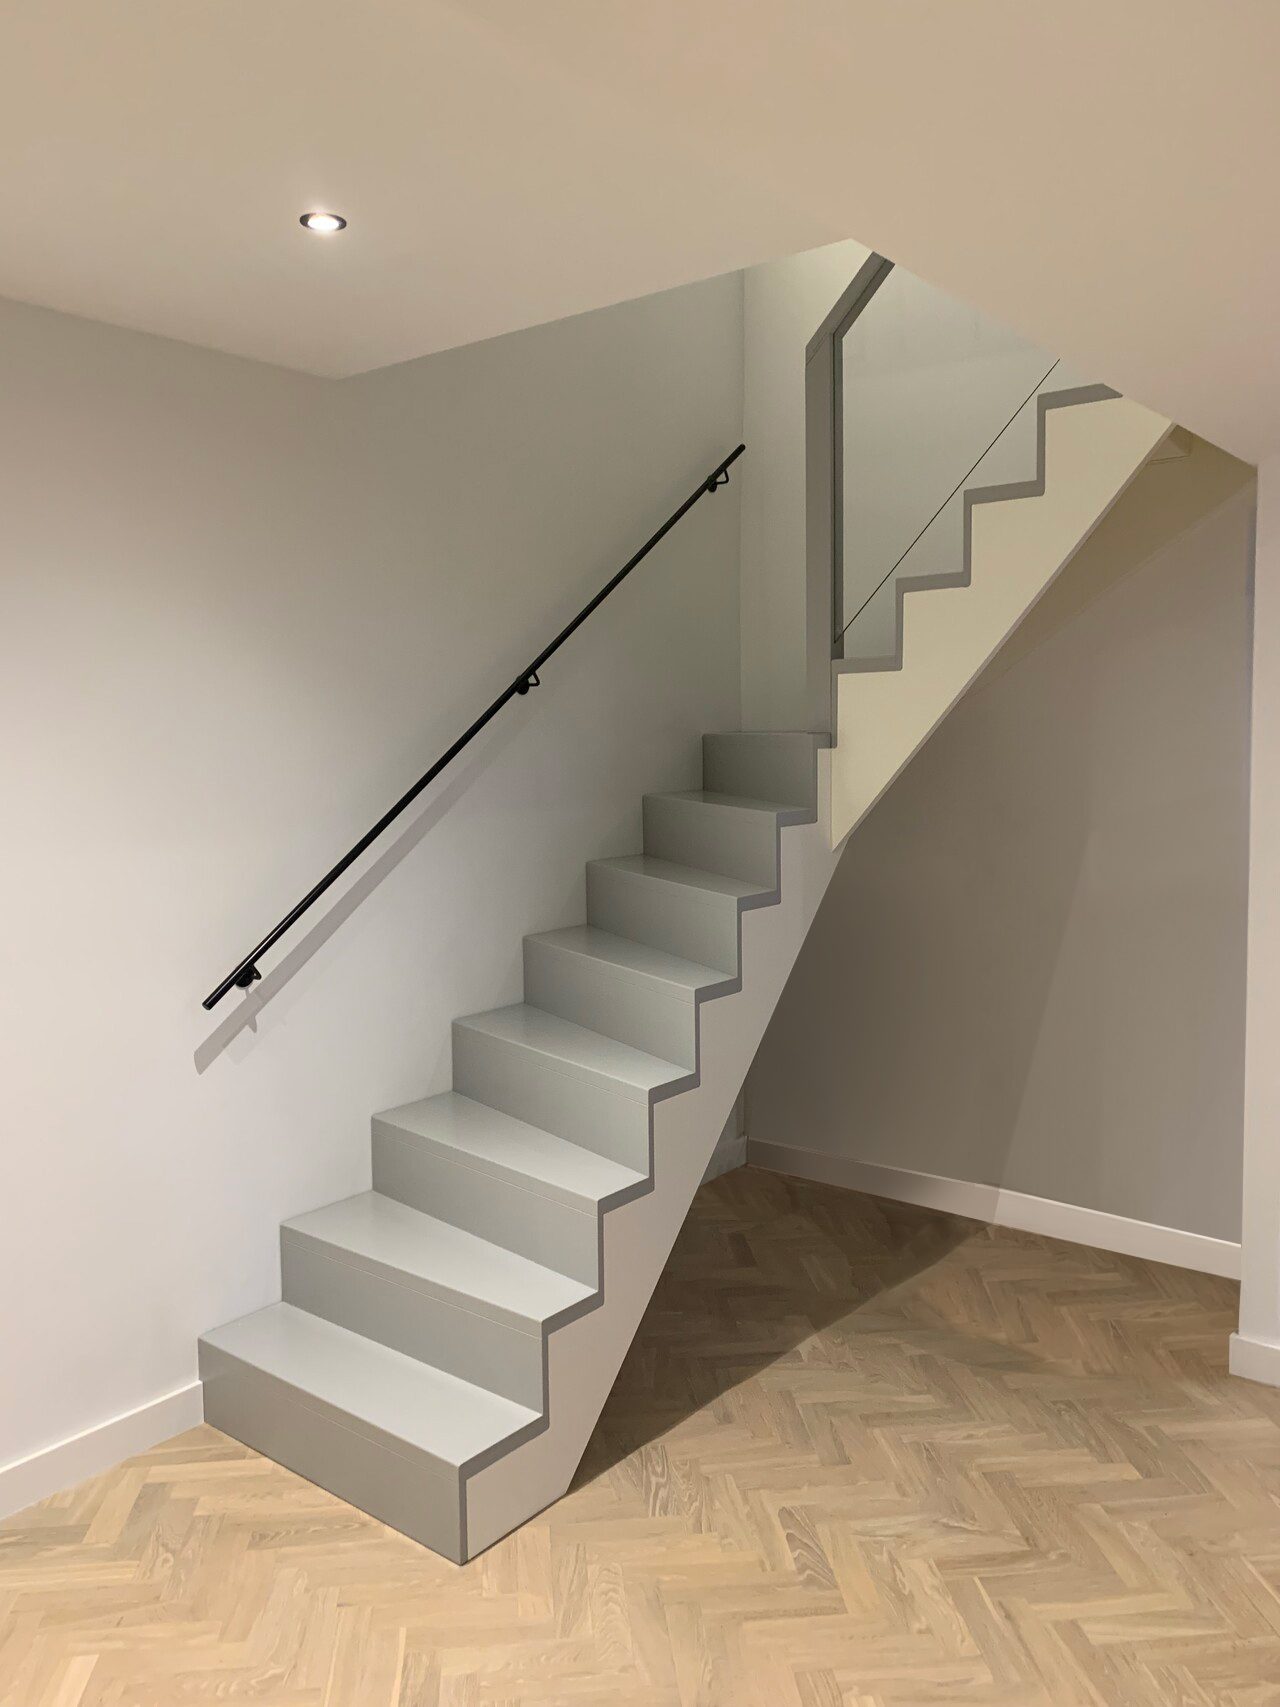 13. Design staircase with glass railings